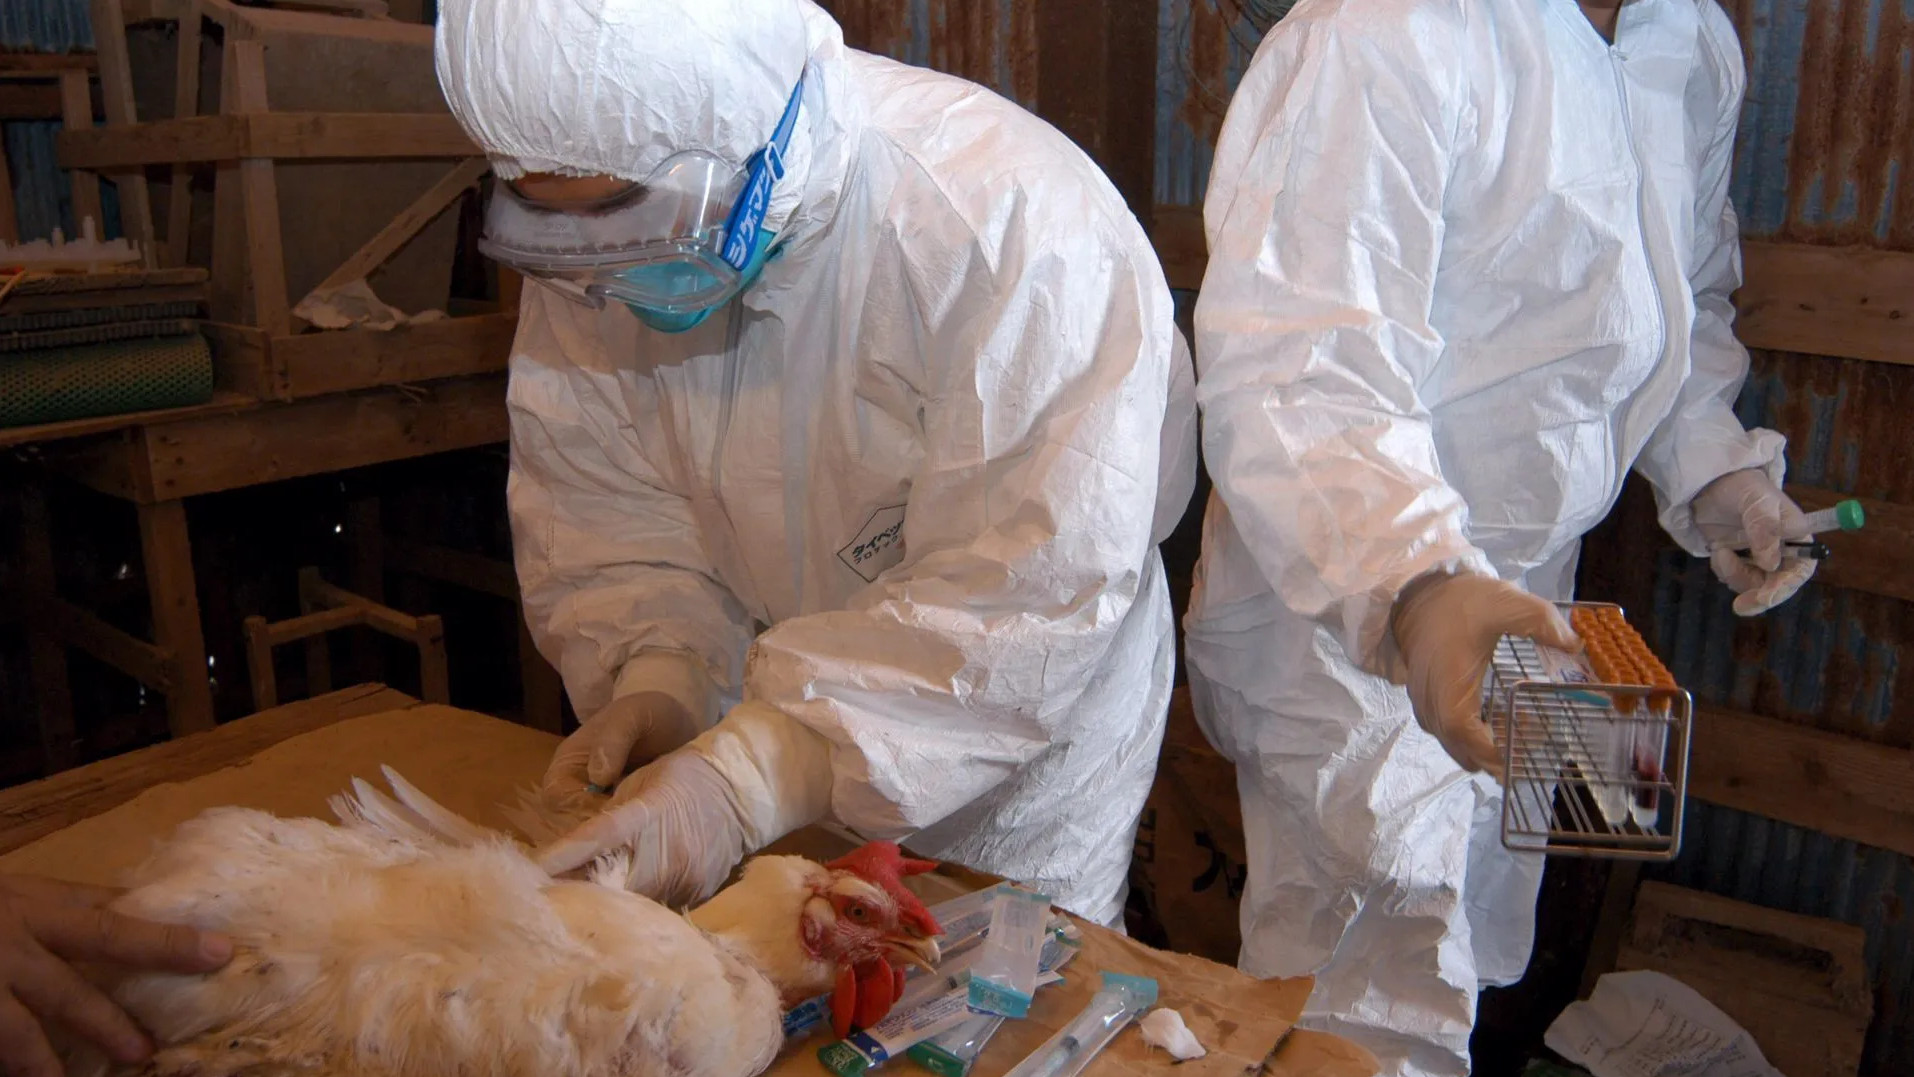 Health workers collect blood samples from chickens at a quarantined farm in Miyazaki prefecture, Japan, on January 17, 2007, after detecting a strain of bird flu on a farm.